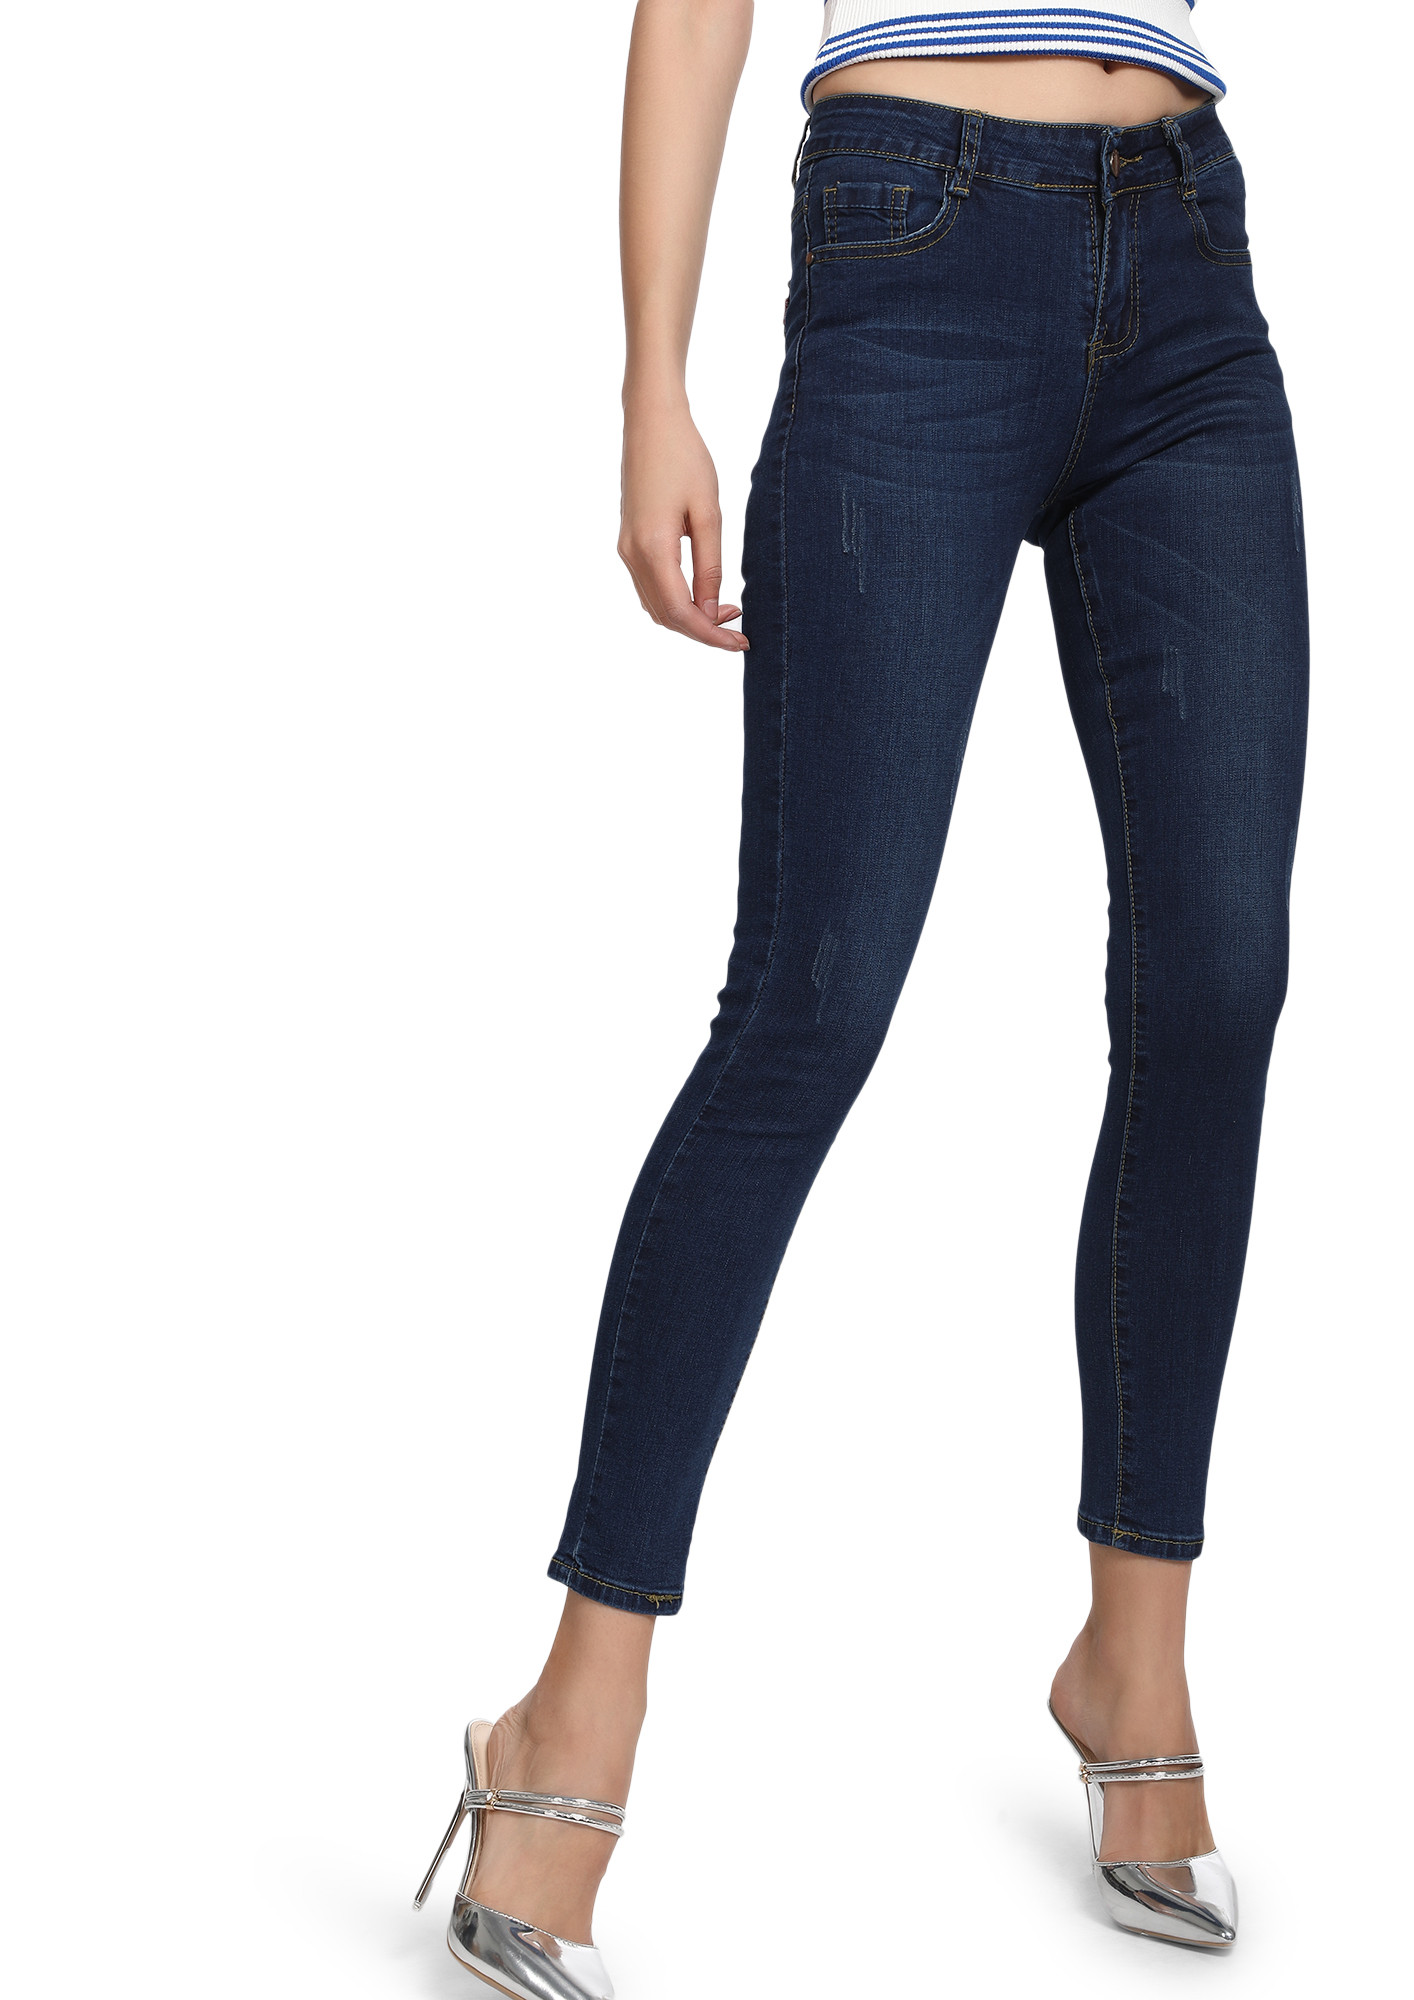 ALL ABOUT THE FIT DARK BLUE SKINNY JEANS